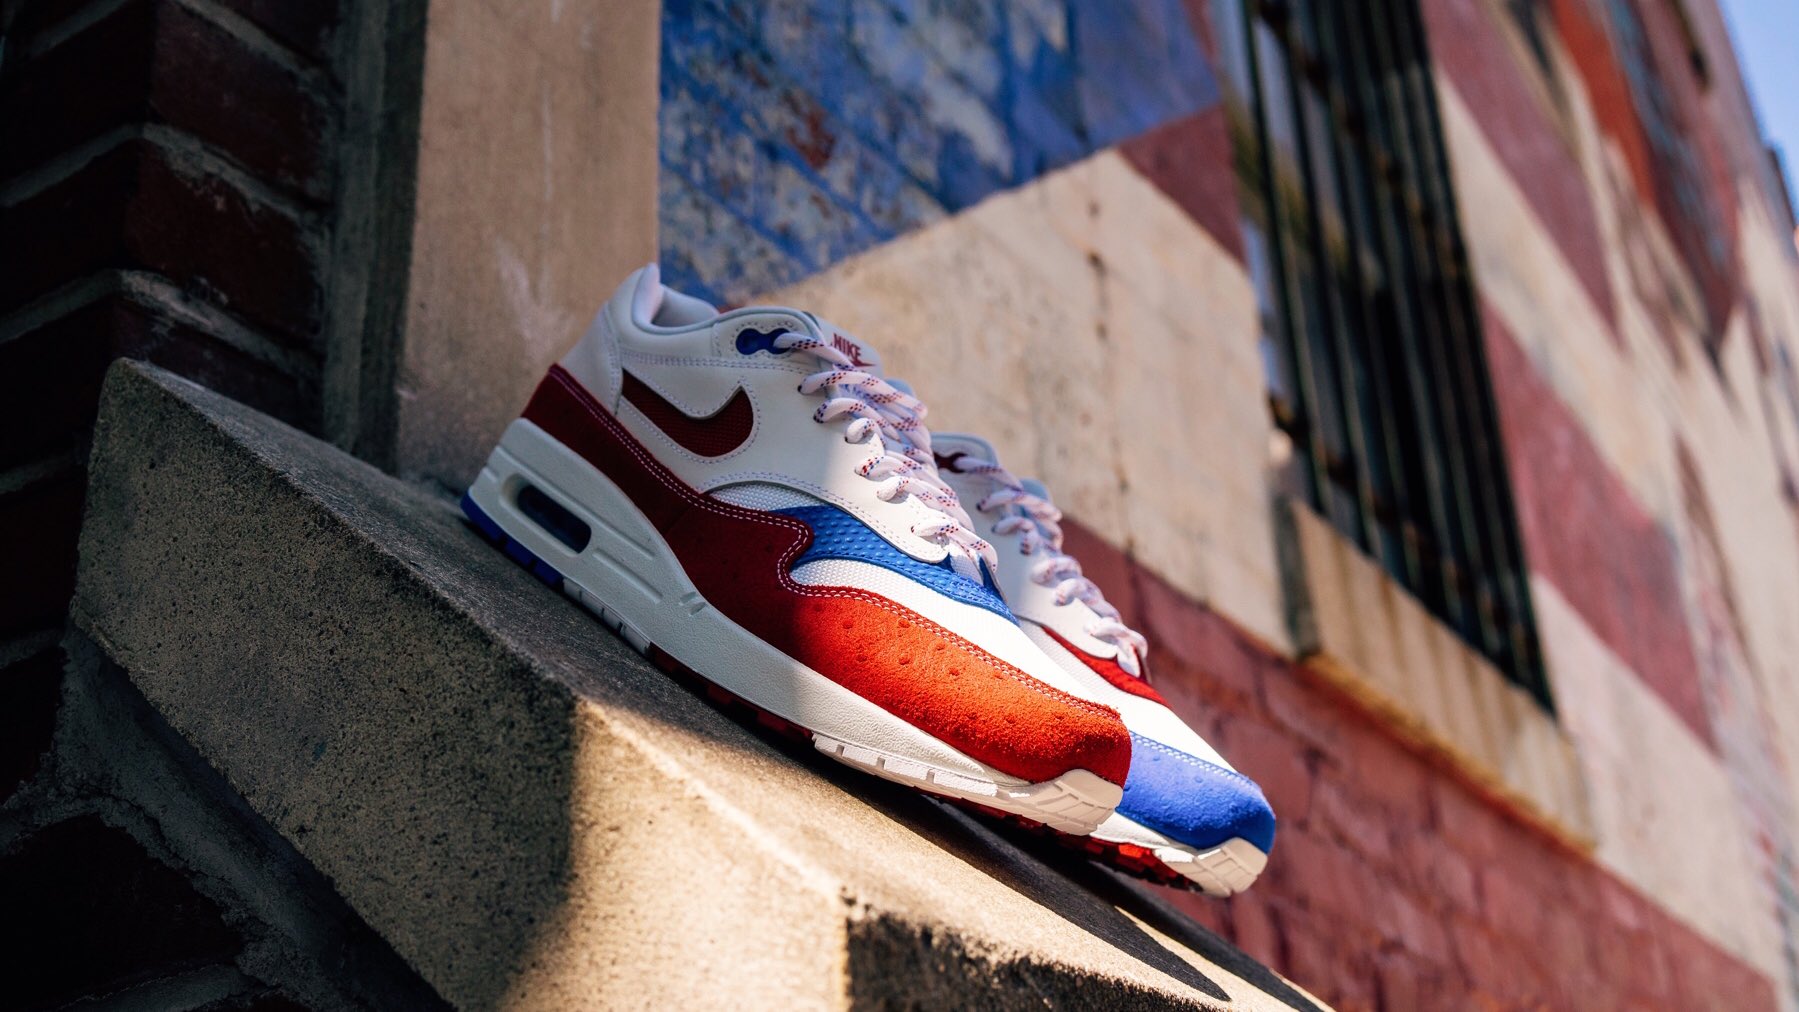 Jimmy Jazz on Twitter: "The Nike Air Max “PR Parade” celebrating the event in NYC with the Puerto Rican flag on the and the “ Pa'lante Mi Gente” under